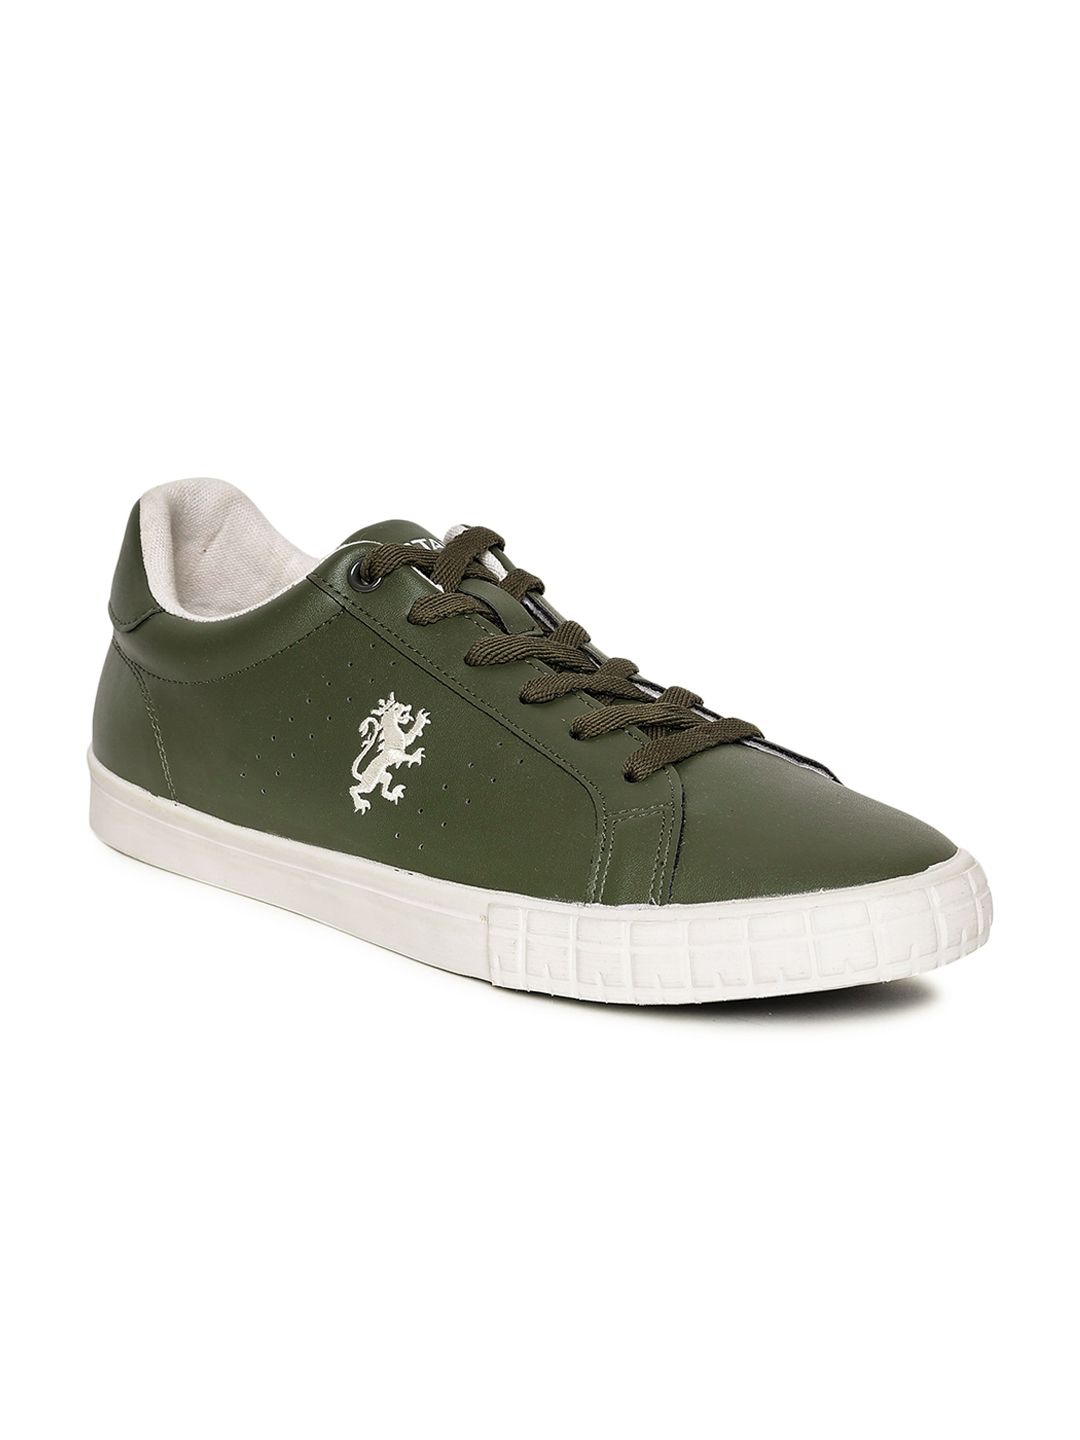 Red Tape Men Olive Green Solid Sneakers